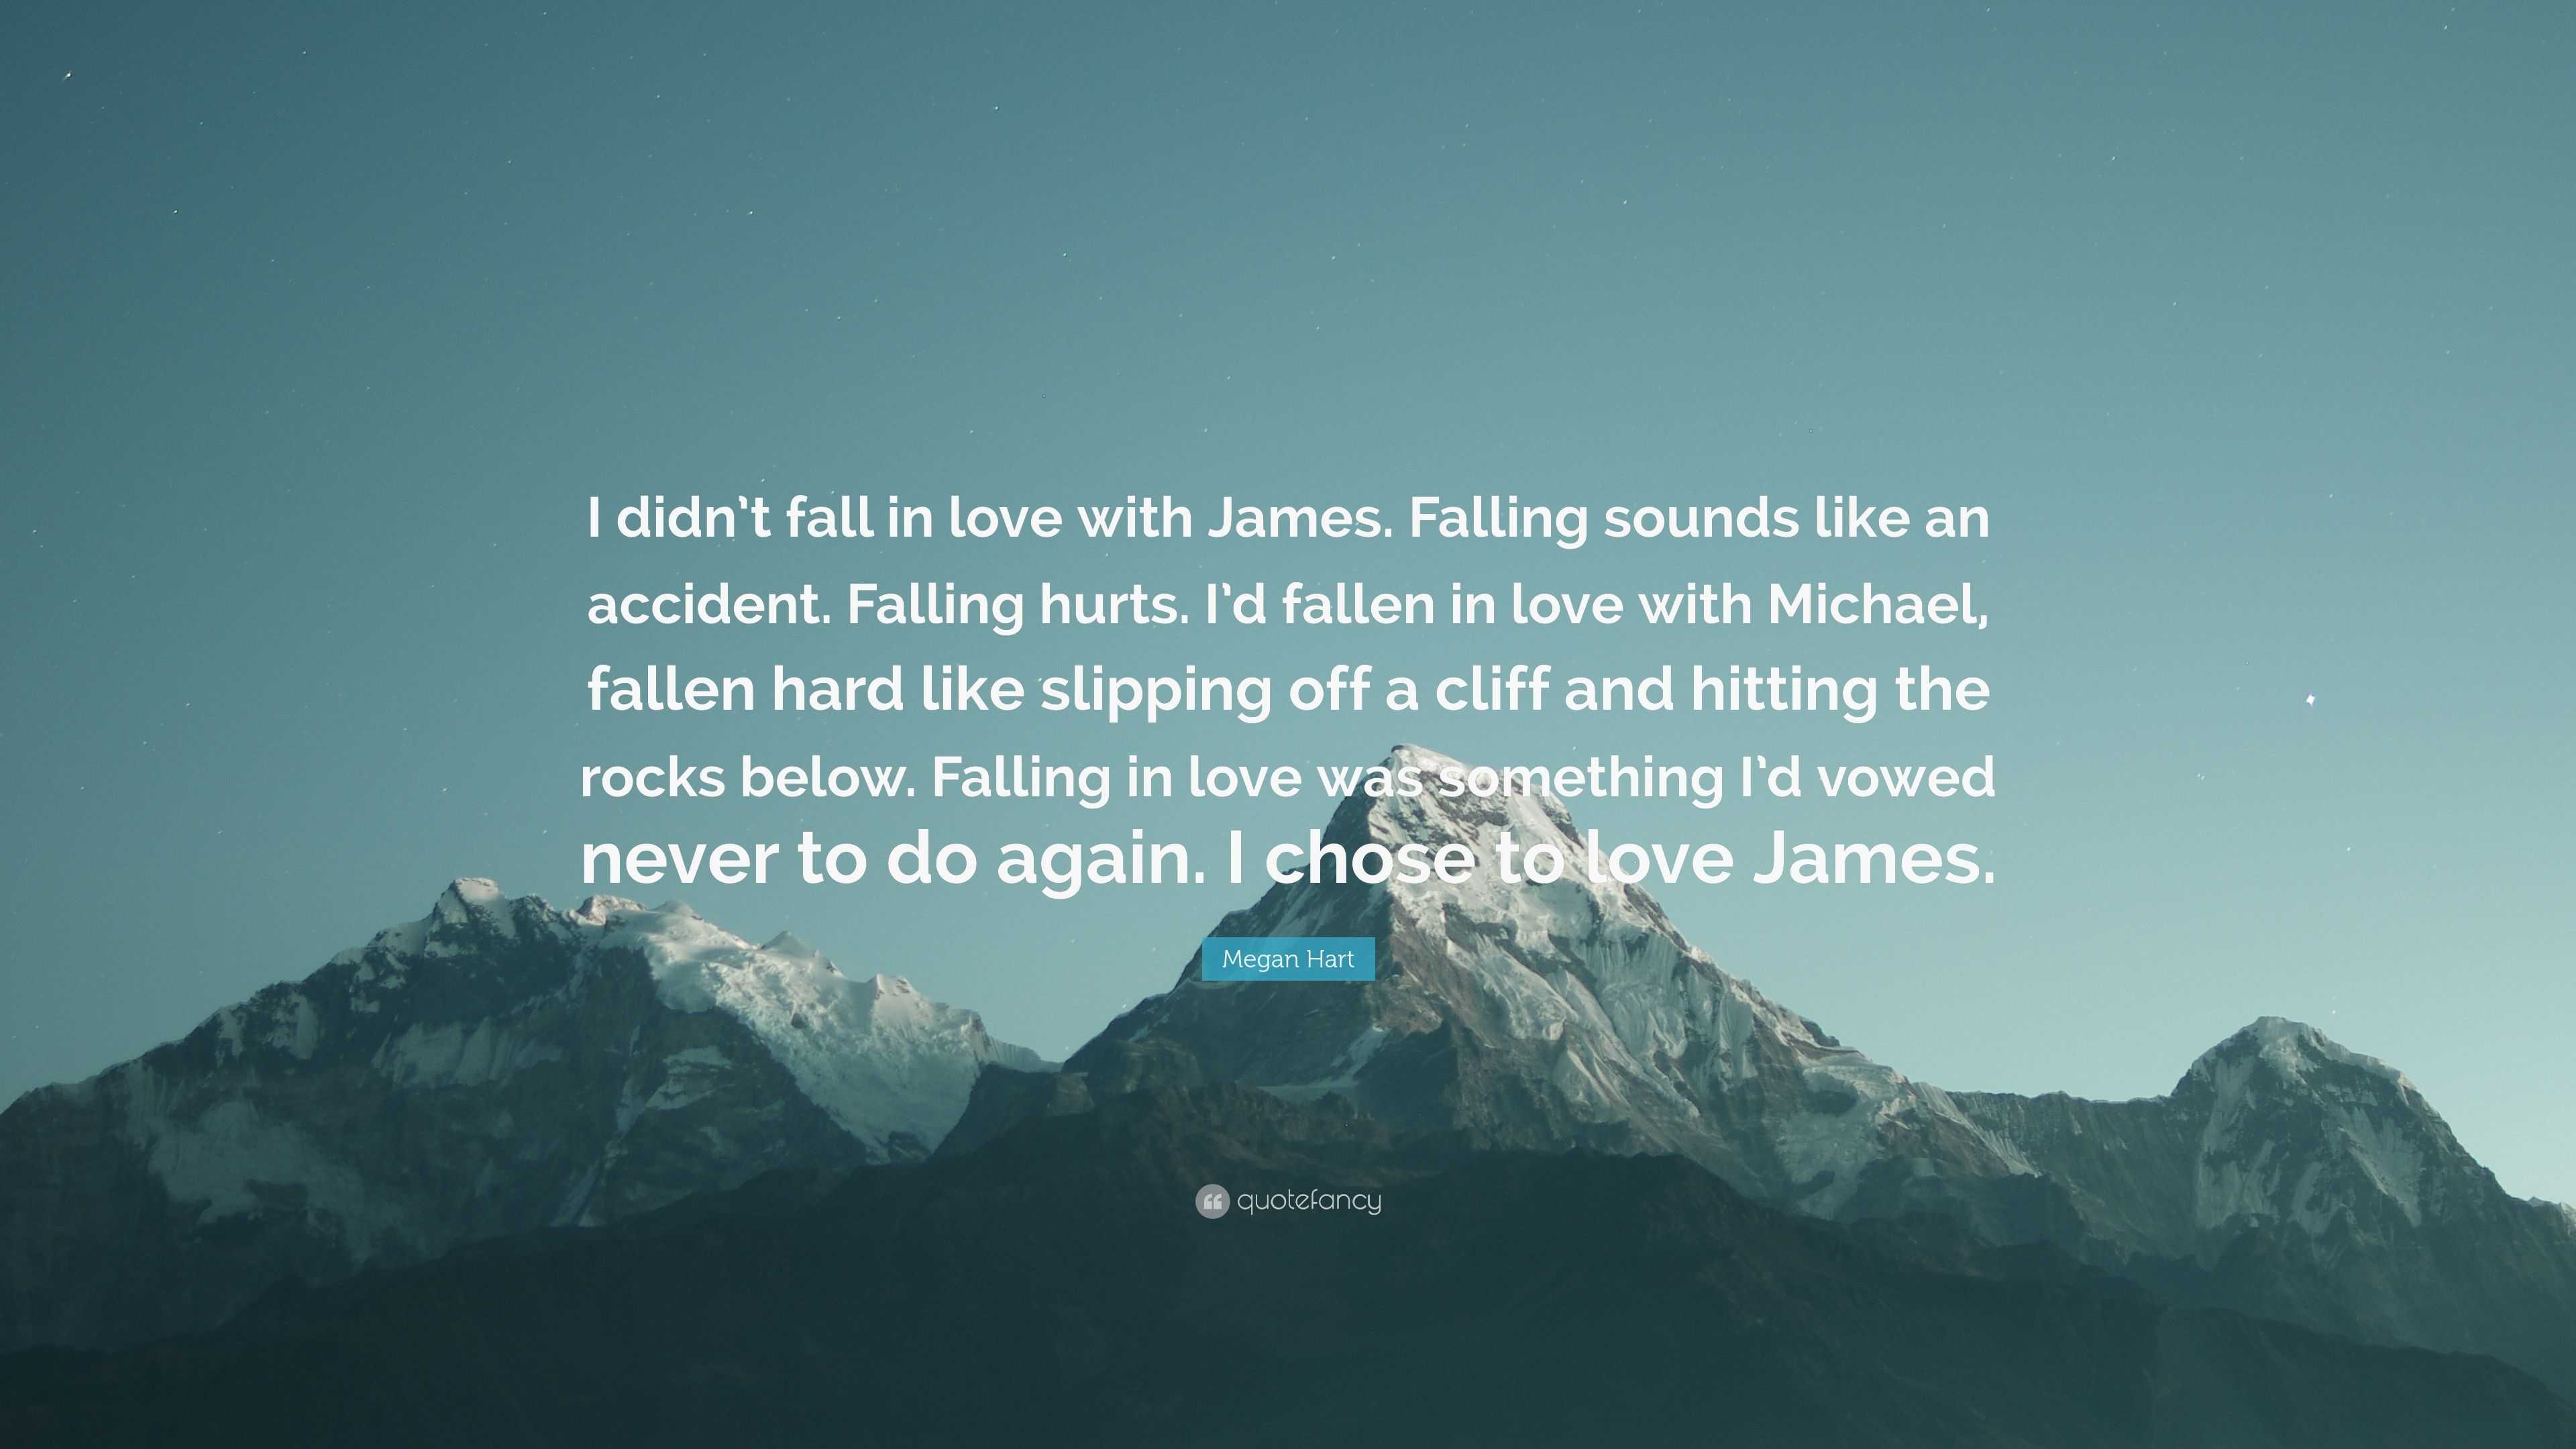 Megan Hart Quote “I didn t fall in love with James Falling